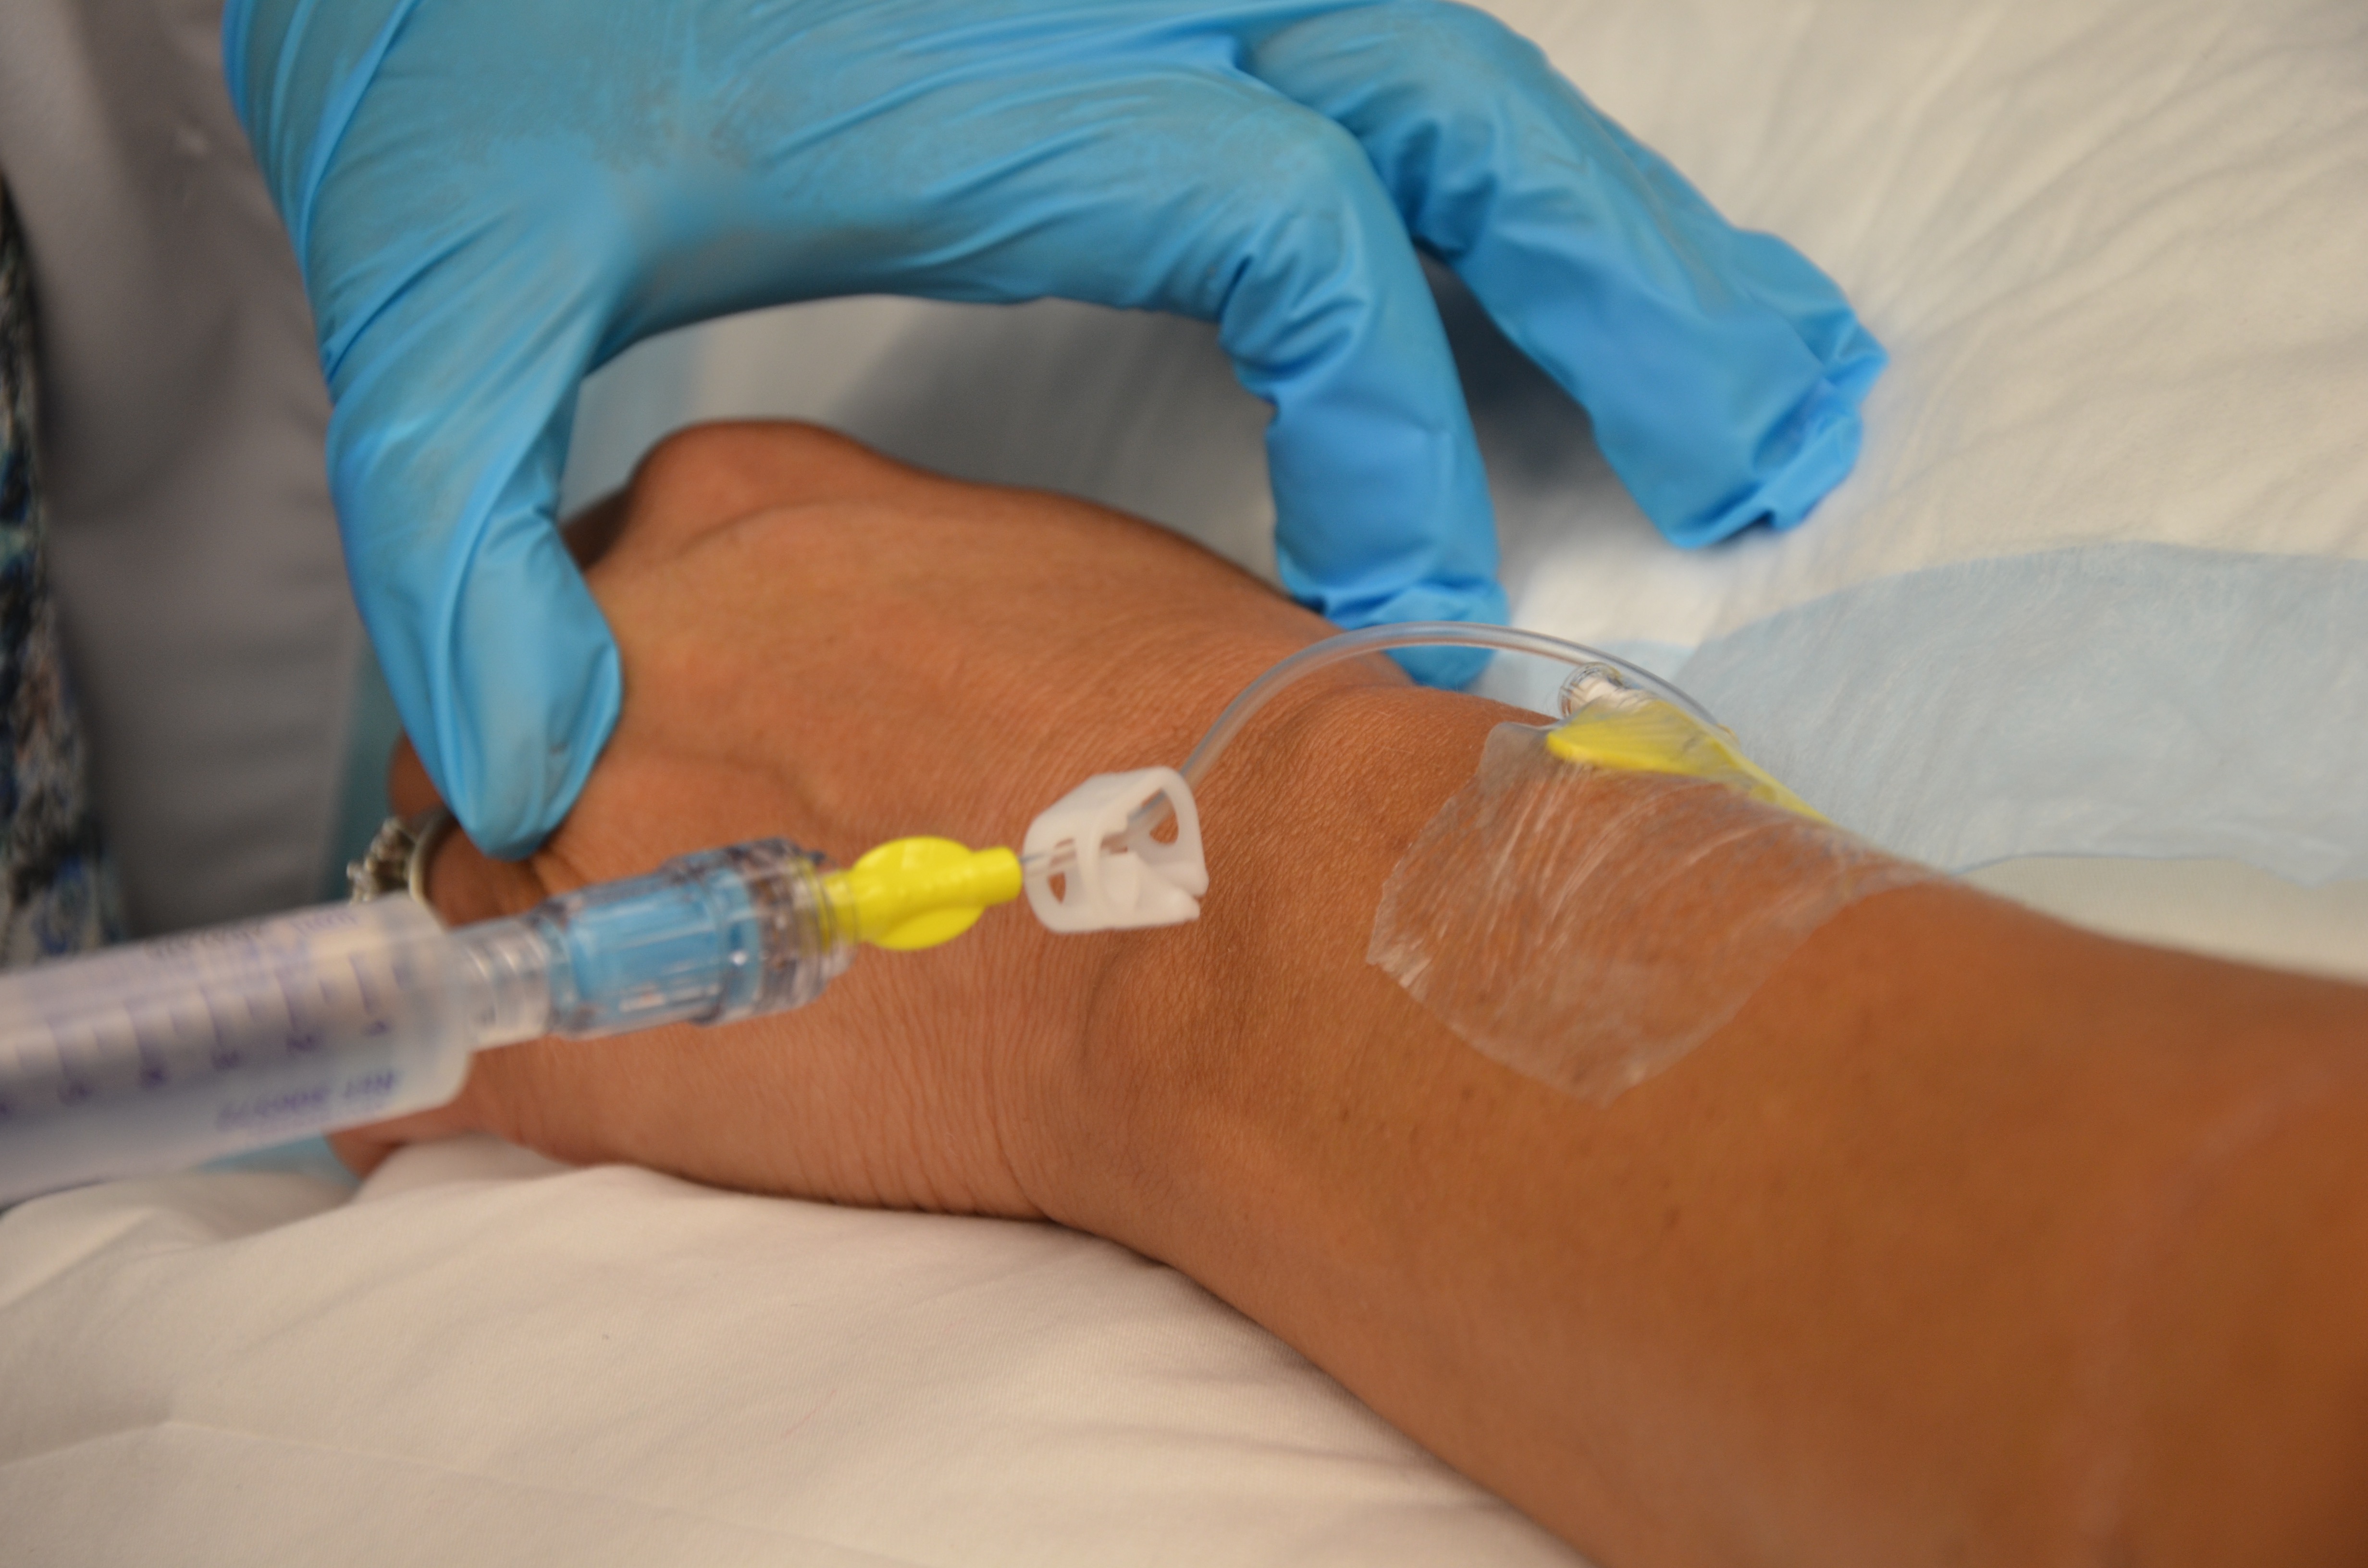 8.5 Flushing a Saline Lock and Converting a Saline Lock to a Continuous IV  Infusion – Clinical Procedures for Safer Patient Care